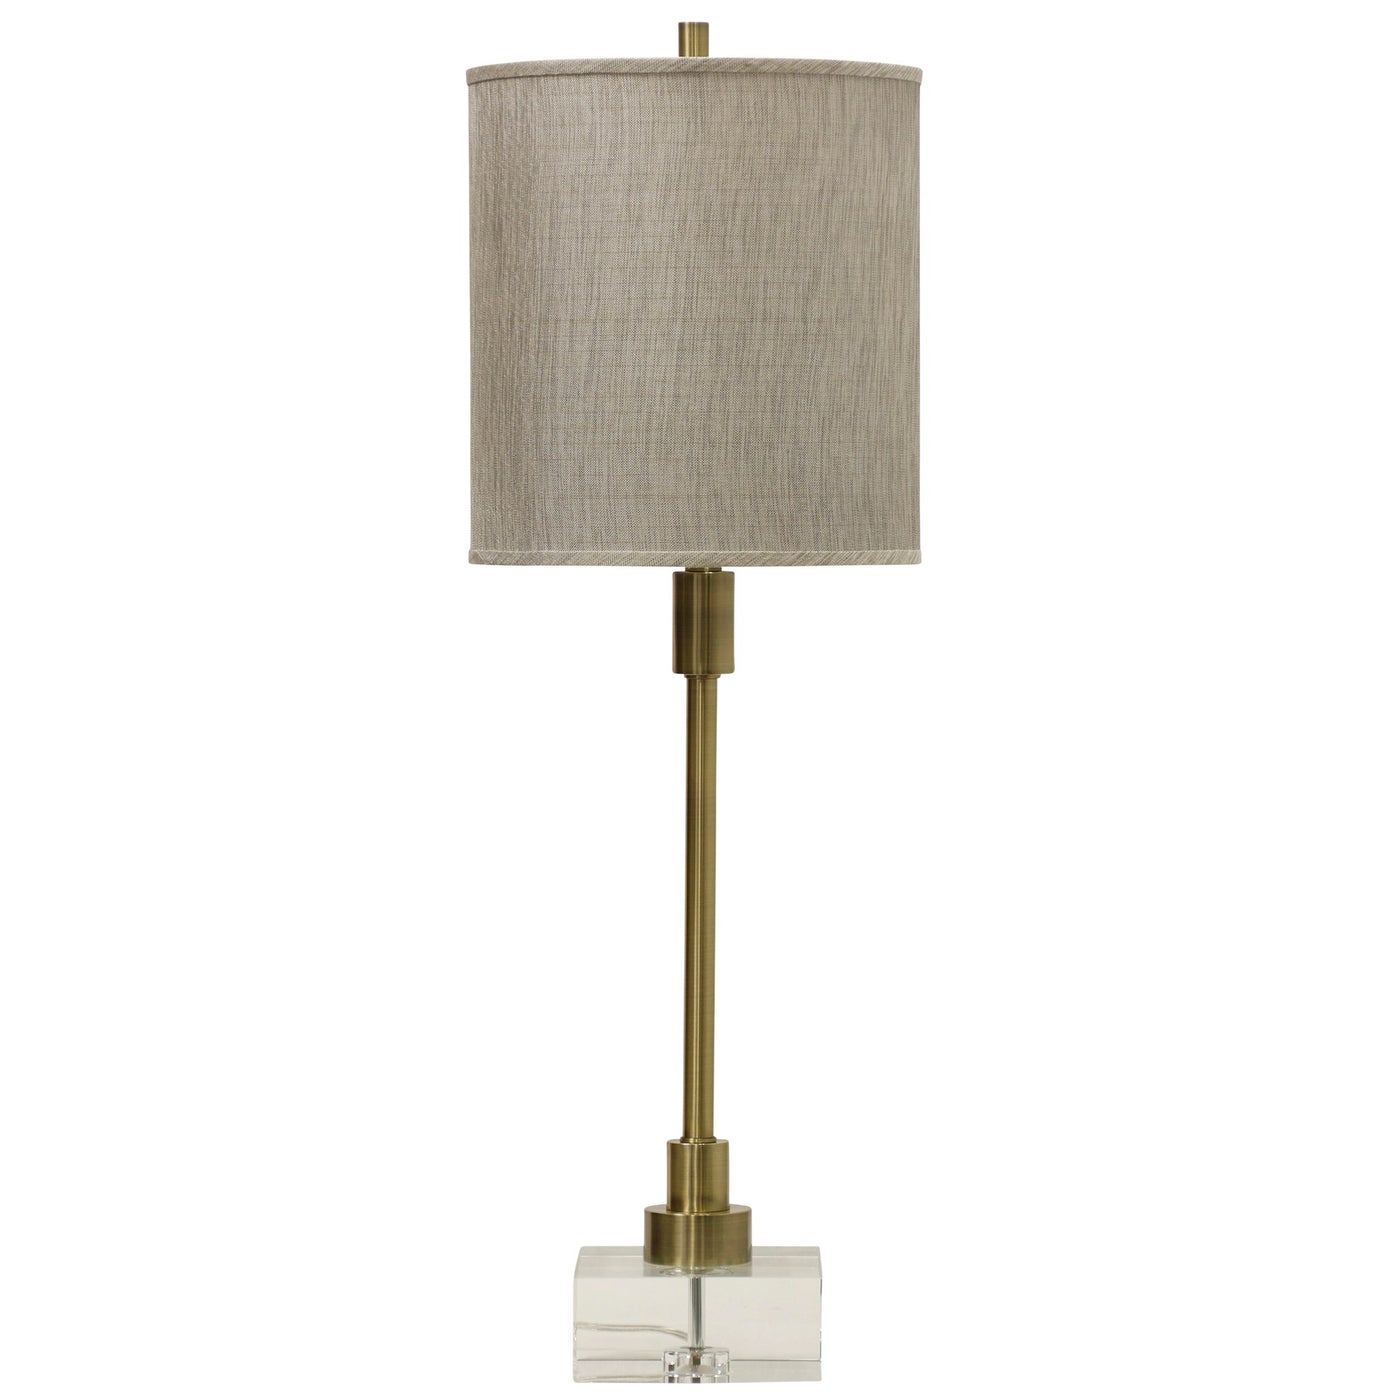 LENOX TABLE LAMP, Antique Brass Finish on Metal Body with Crystal Base, Hardback Shade, 3-Way Soc - table lamps